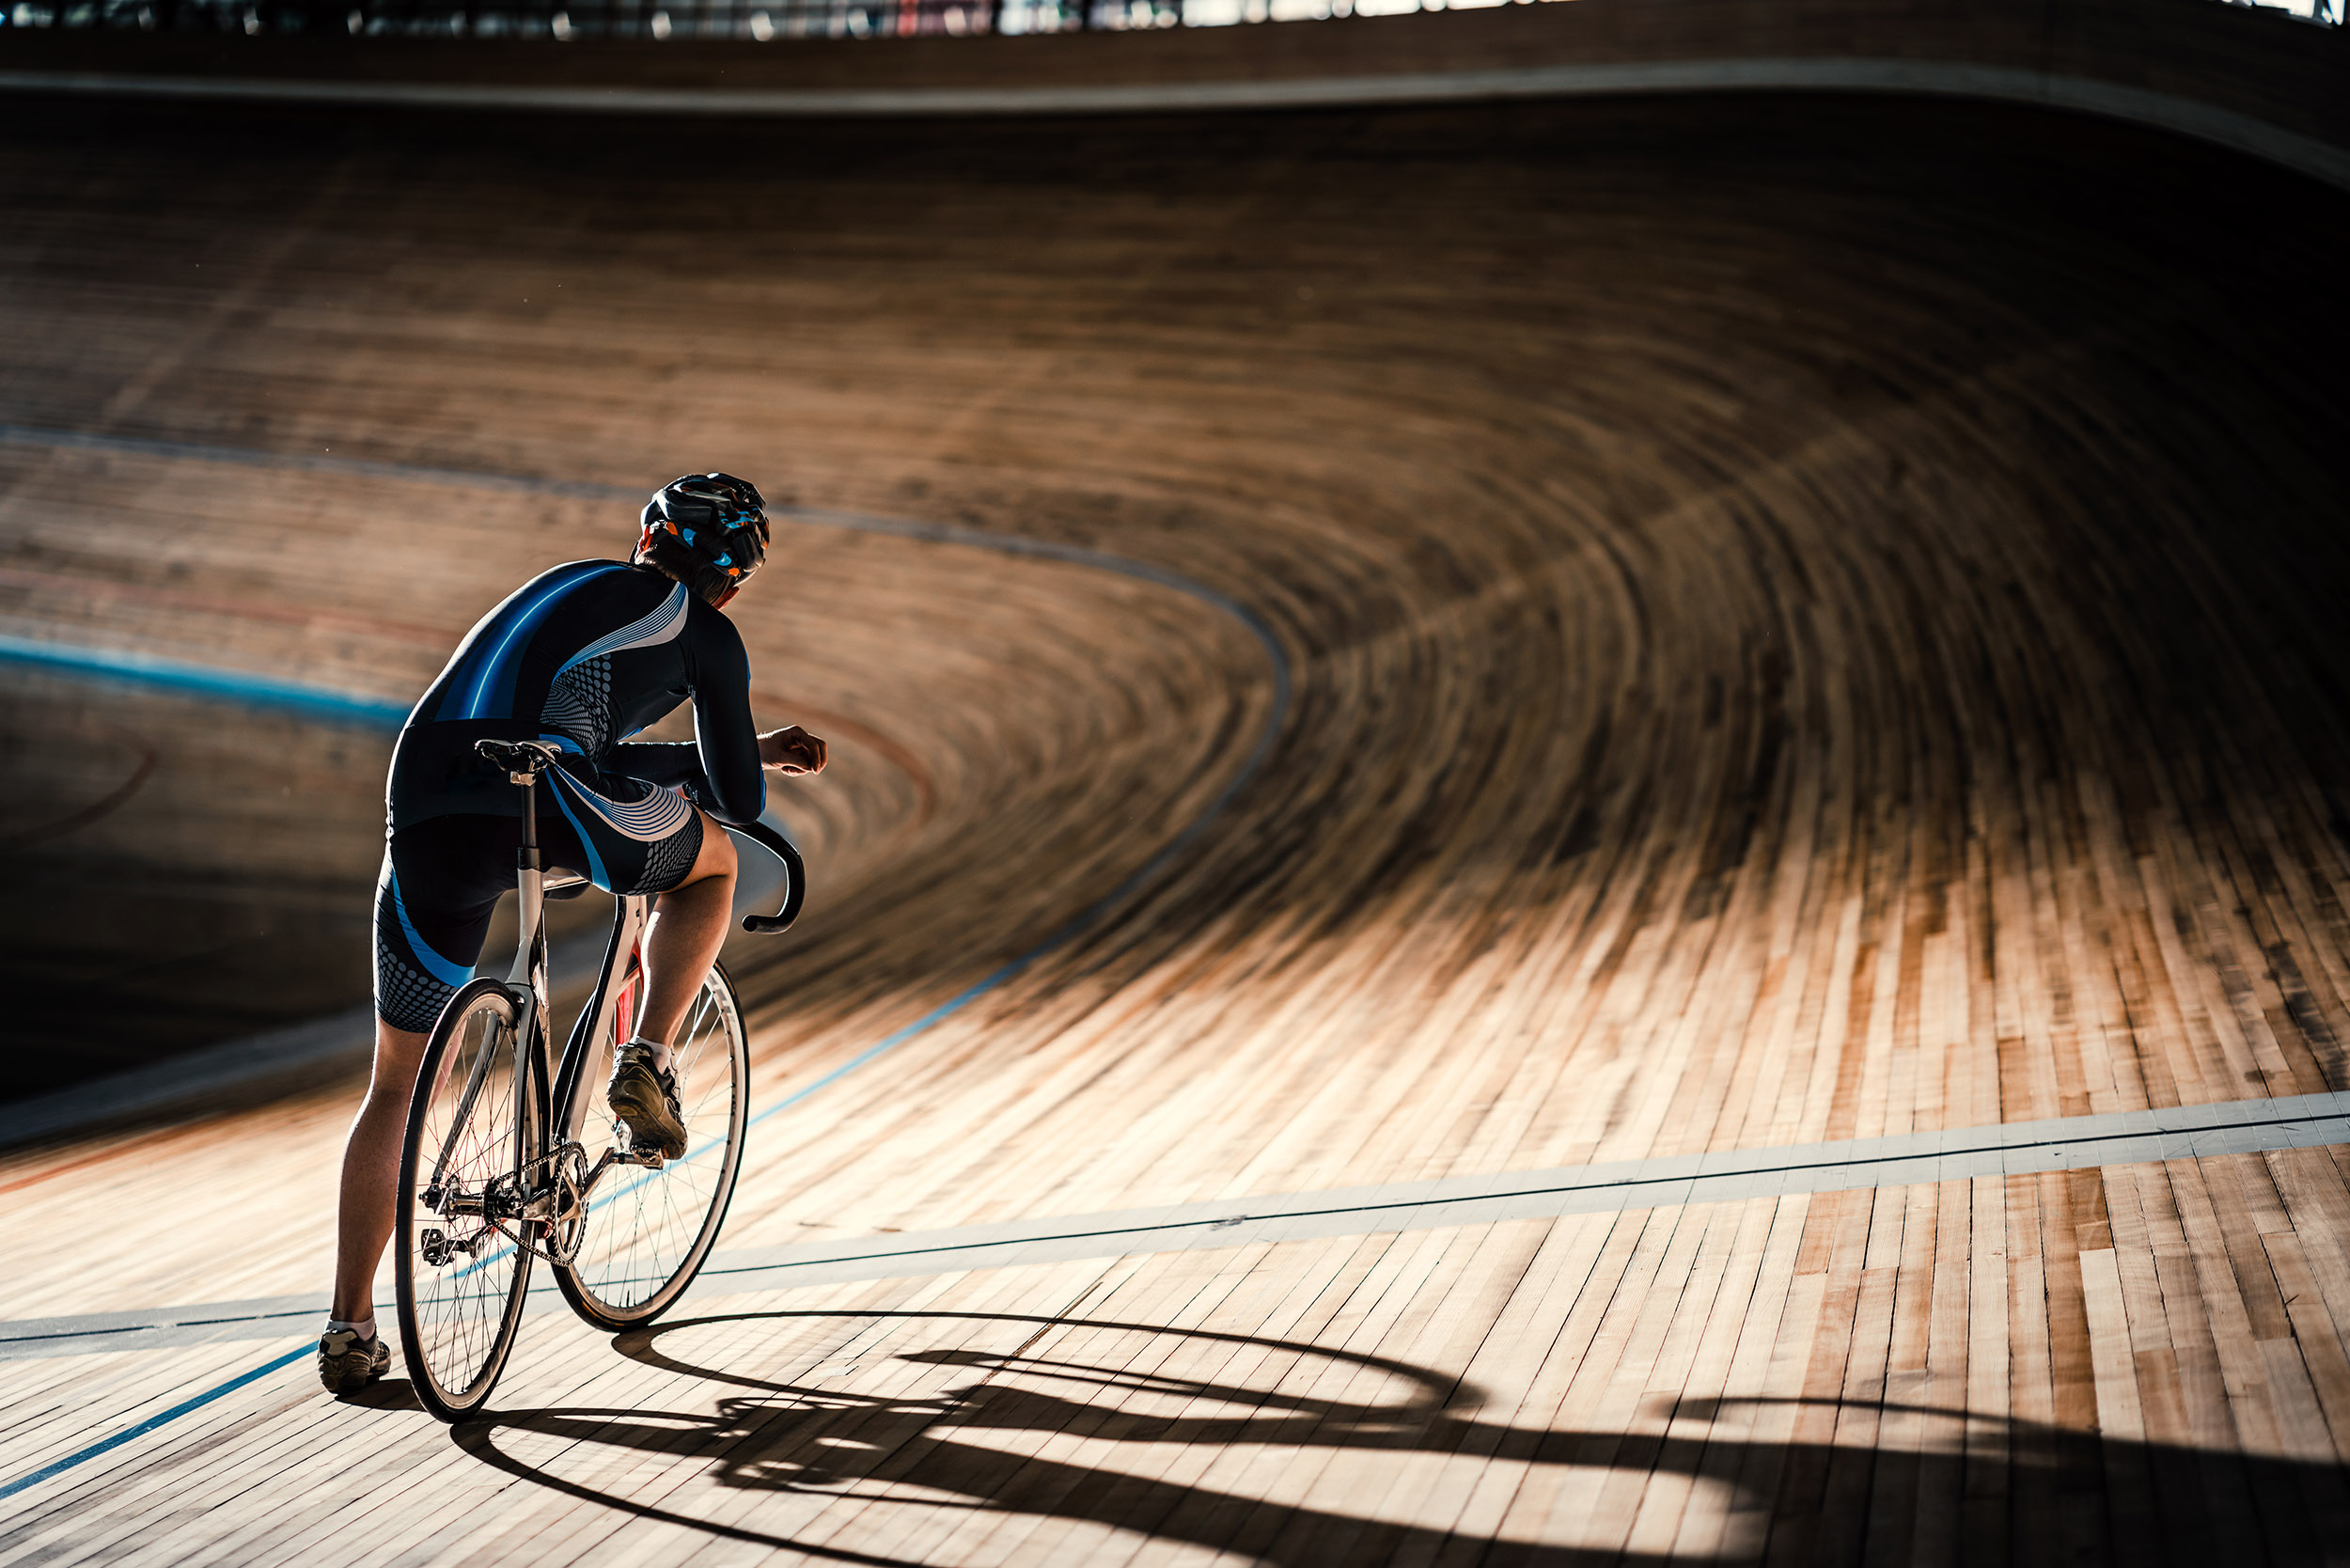 You Could Be in the 2028 Olympics: US Team Opens Track Cycling Test to Public